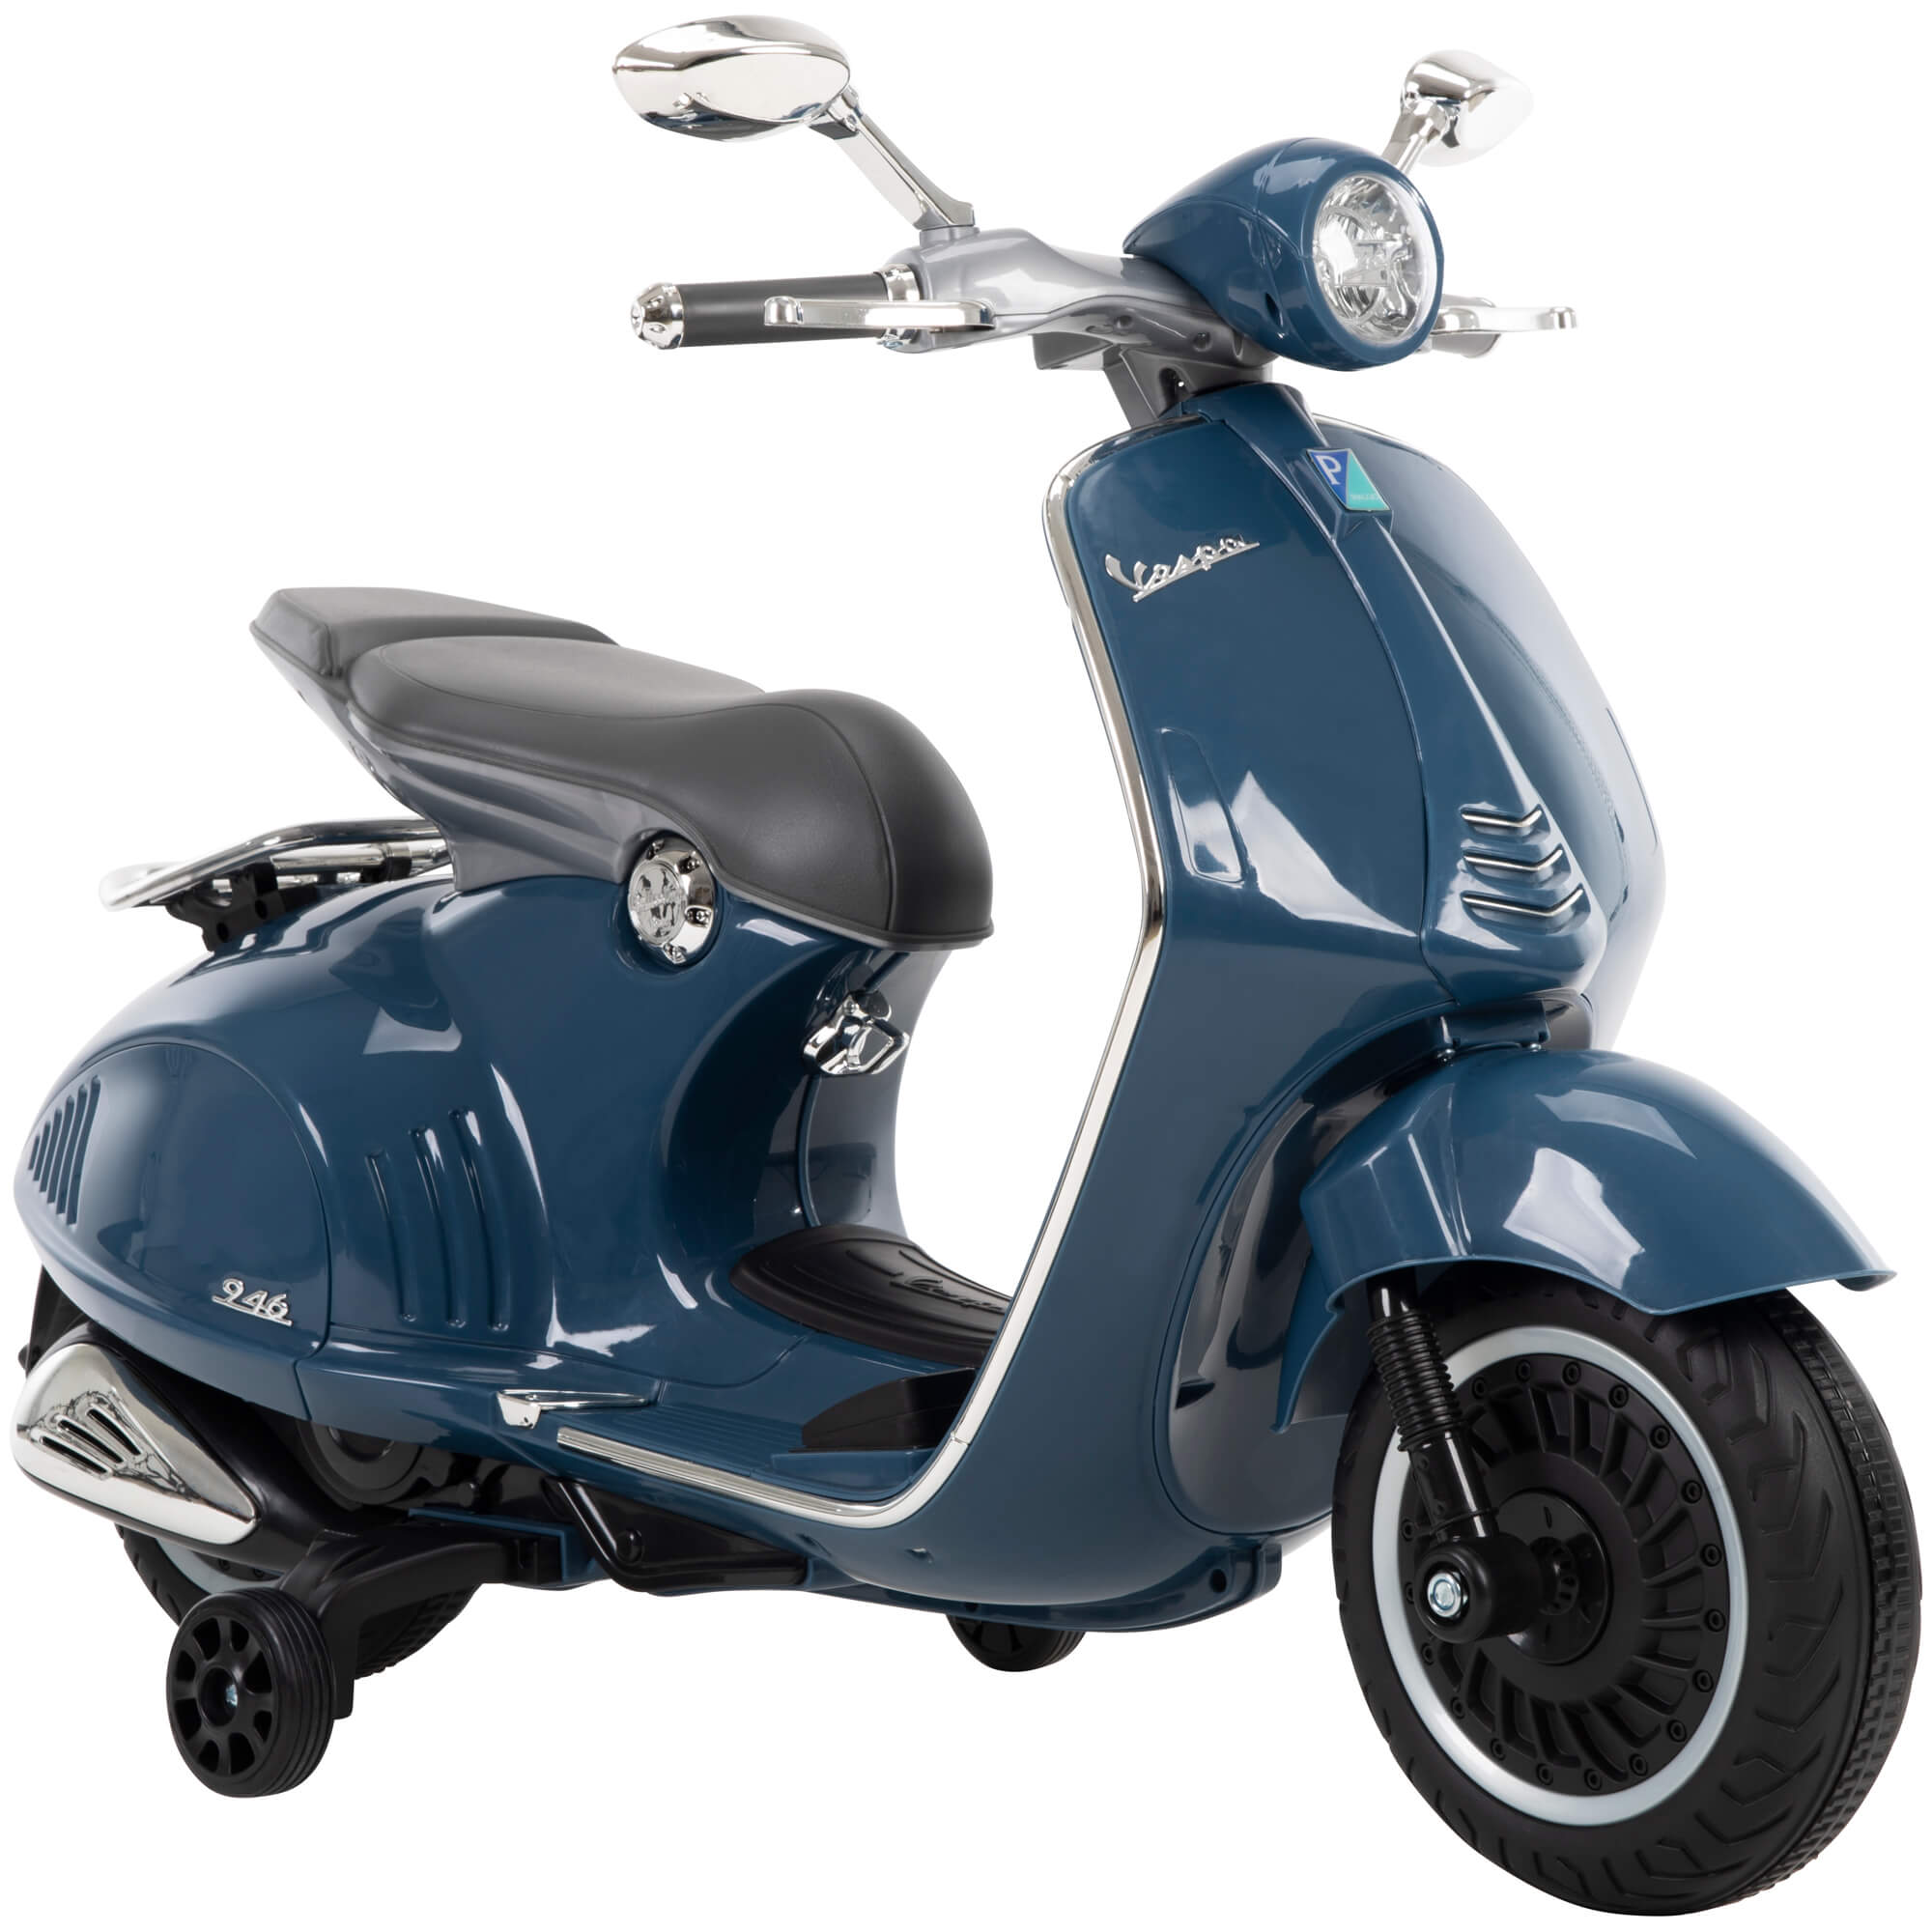 Huffy 6V Vespa Ride-On Electric Scooter for Kids, Blue - image 1 of 7